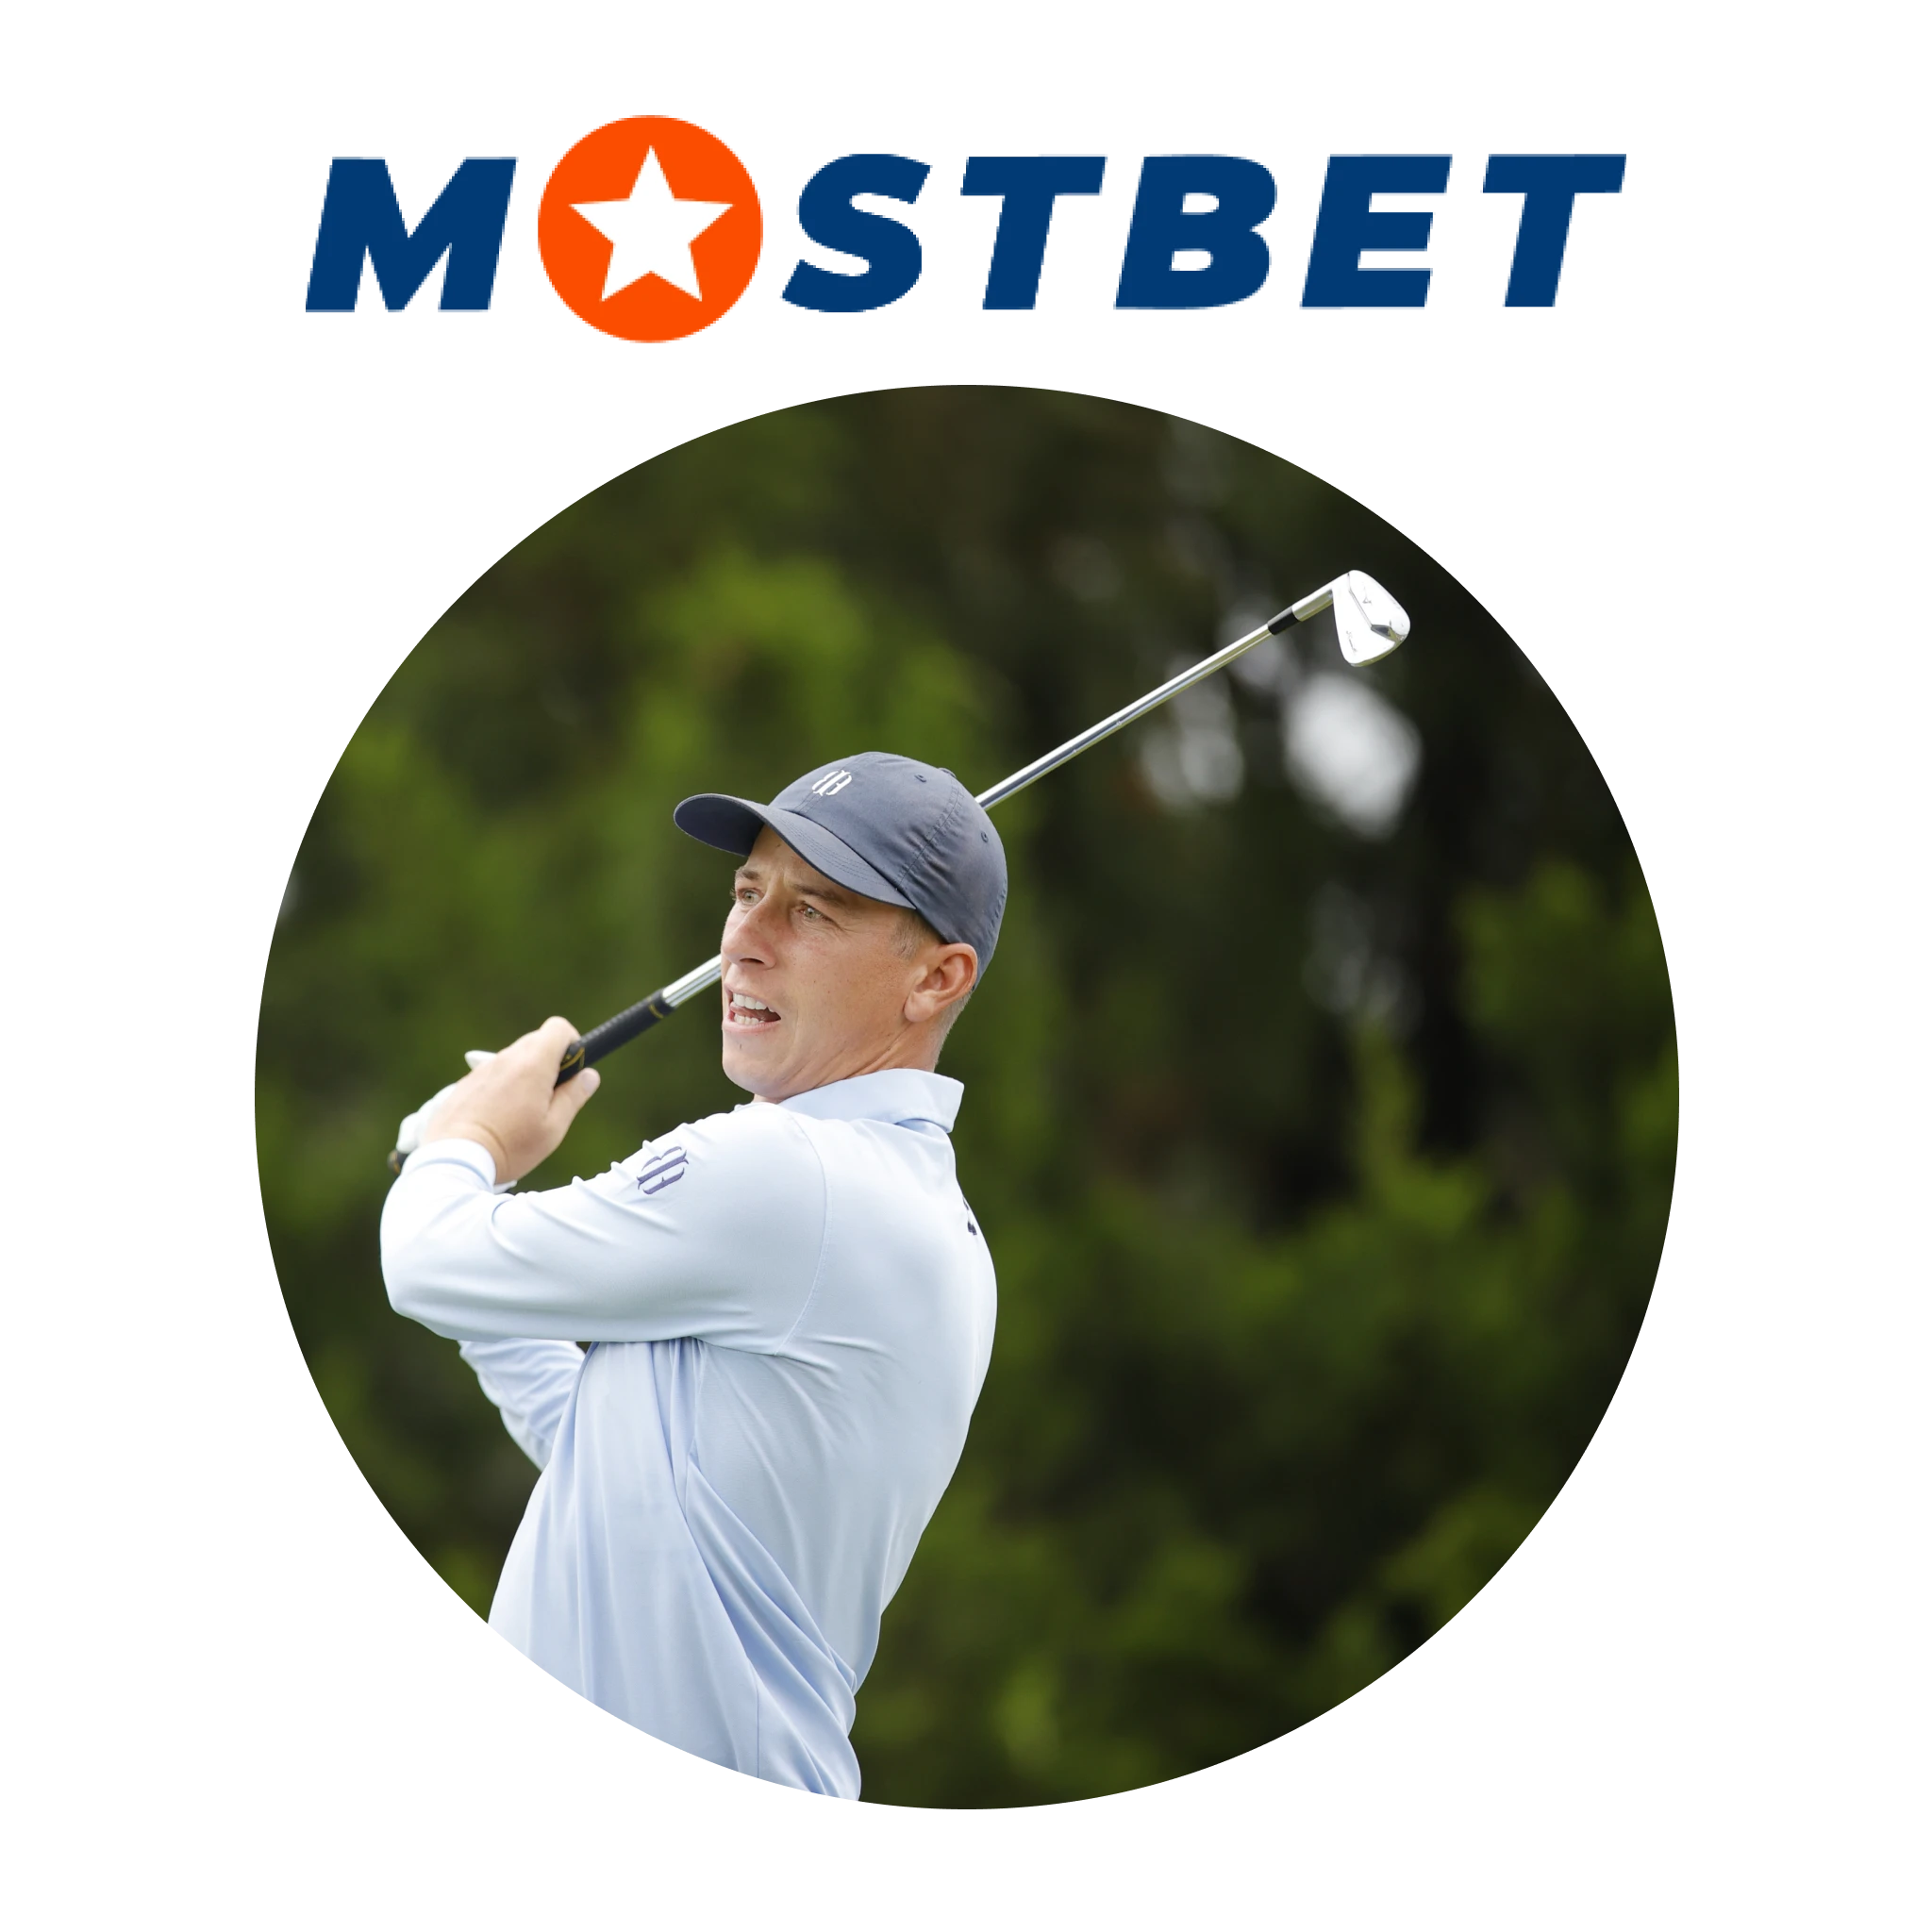 Mostbet offers a great platform for golf betting.